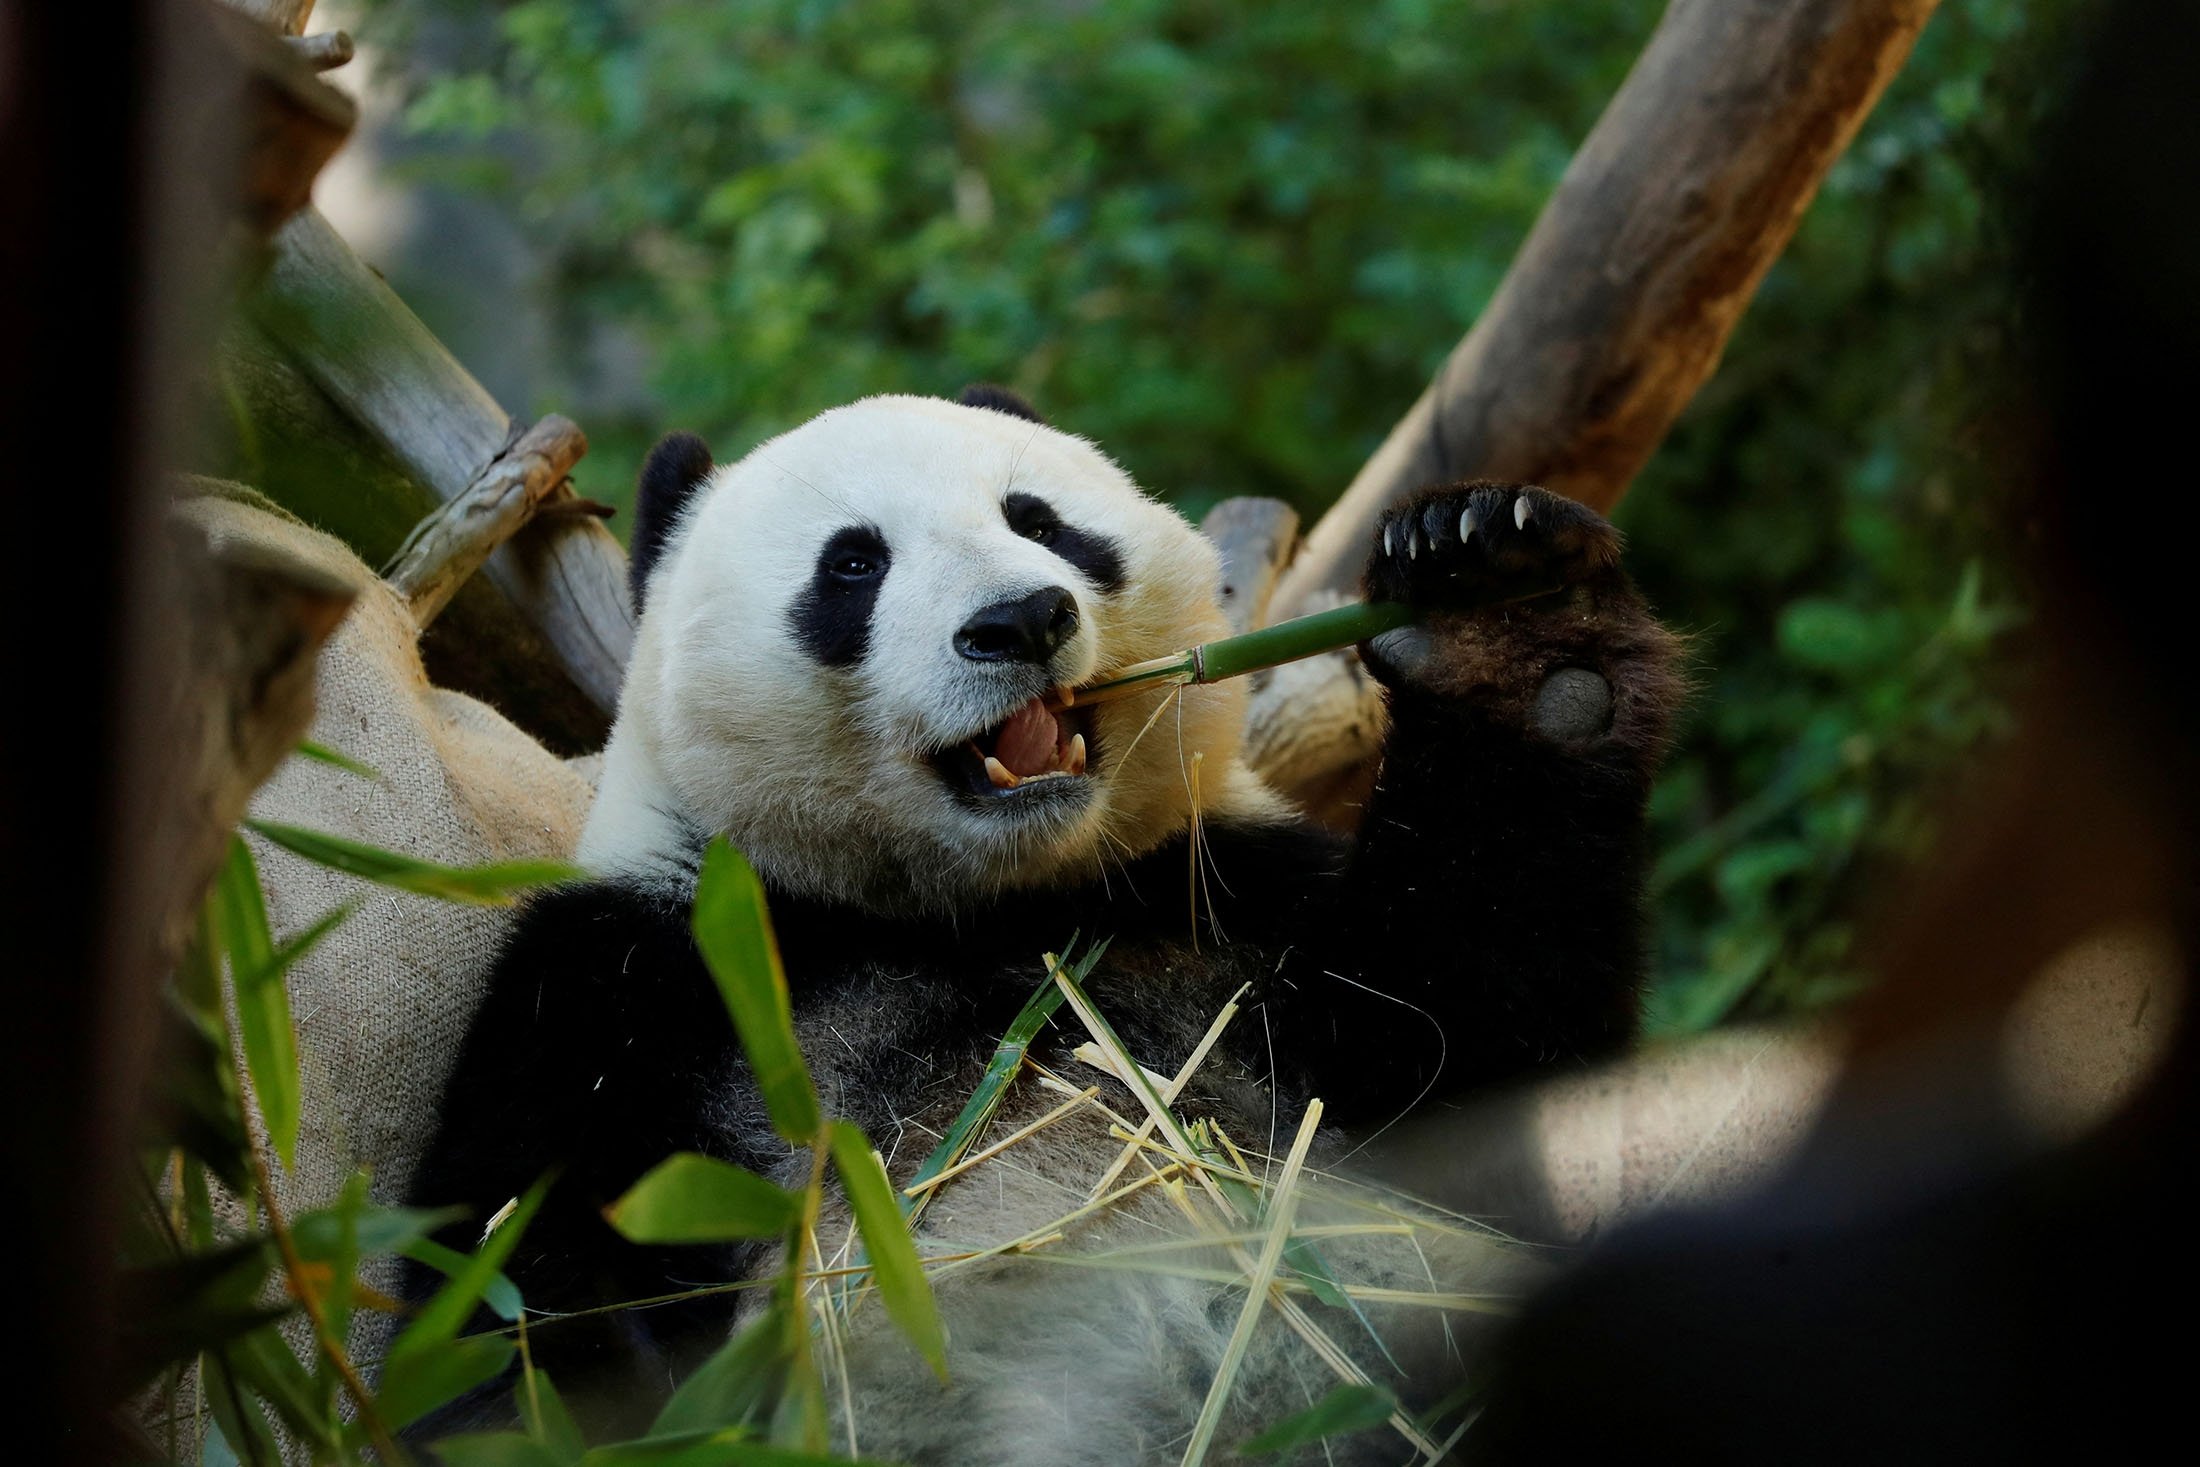 Giant male panda Xiao Liwu eats a meal of bamboo before being repatriated to China with his mother Bai Yun, bringing an end to a 23-year-long panda research program in San Diego, California, U.S., April 18, 2019. (Reuters Photo)